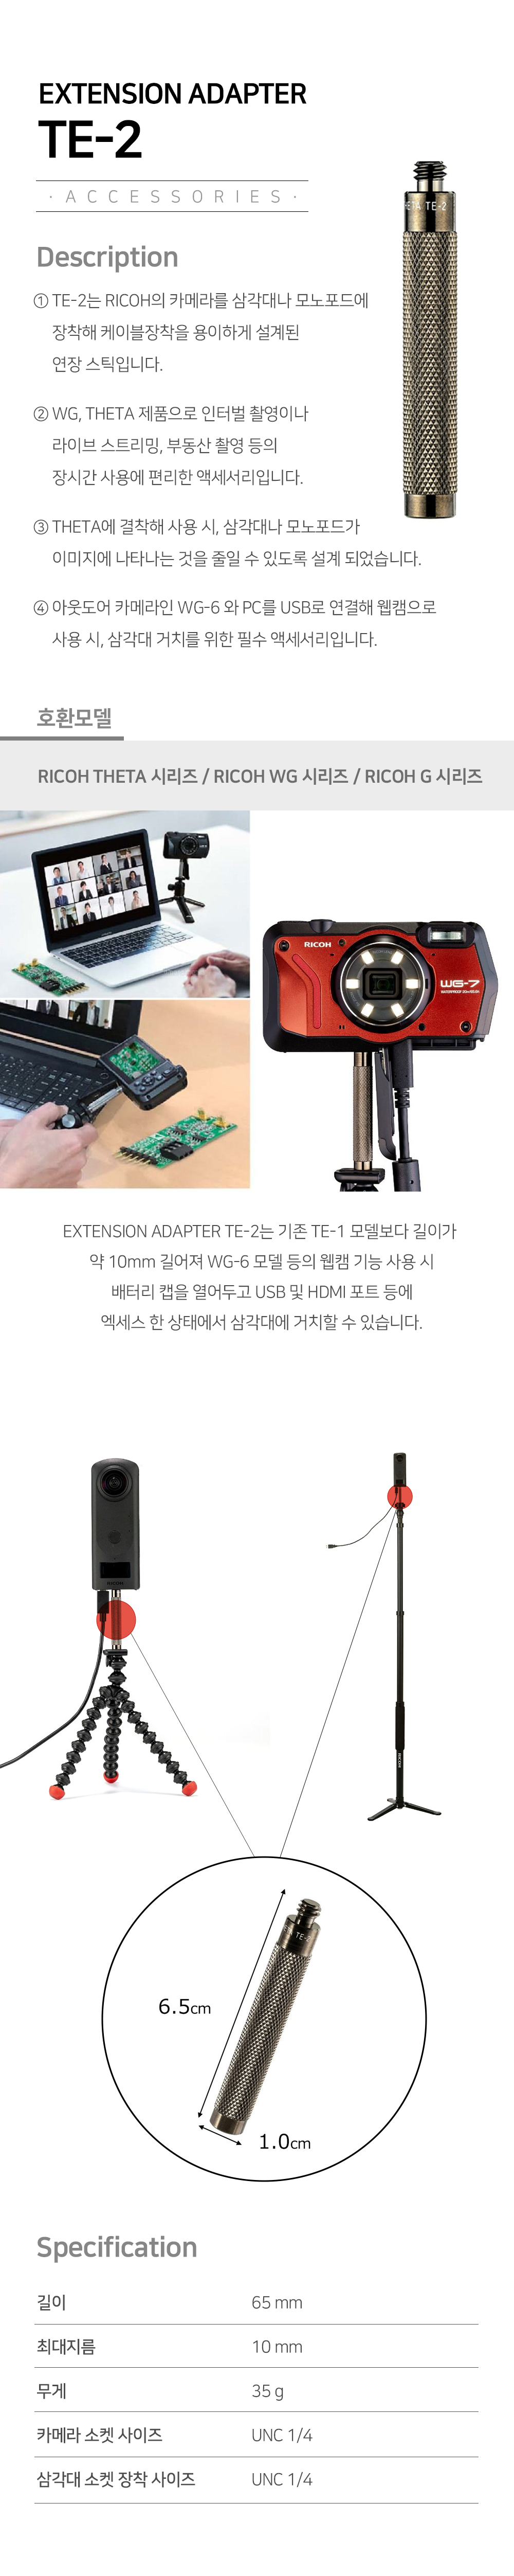 EXTENSION ADAPTER TE-2